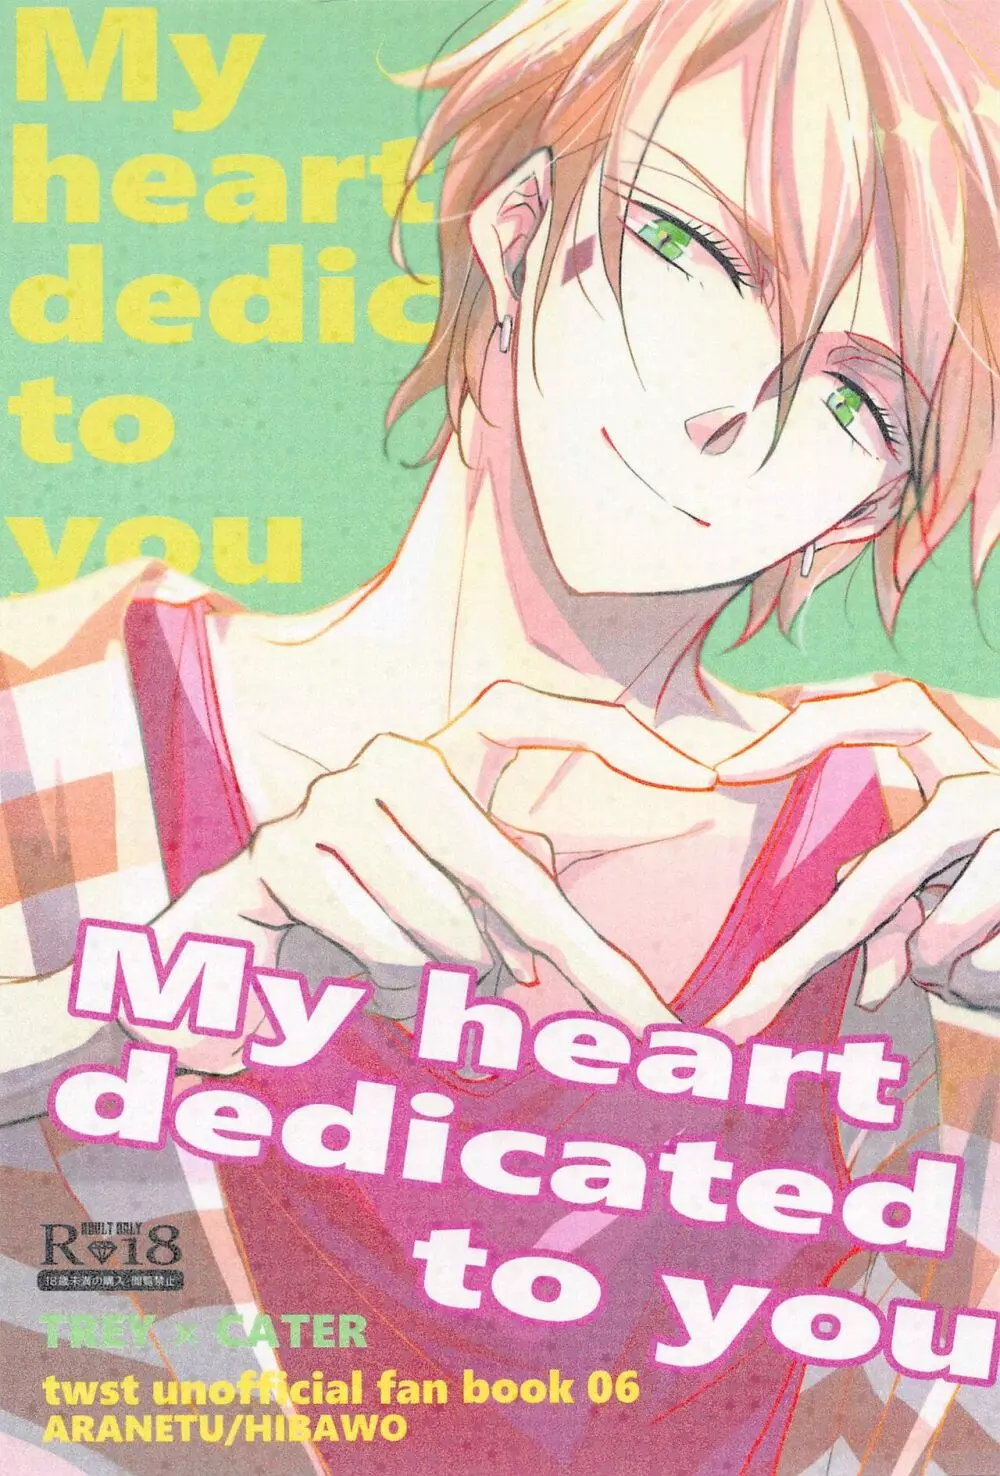 My heart dedicated to you - page1